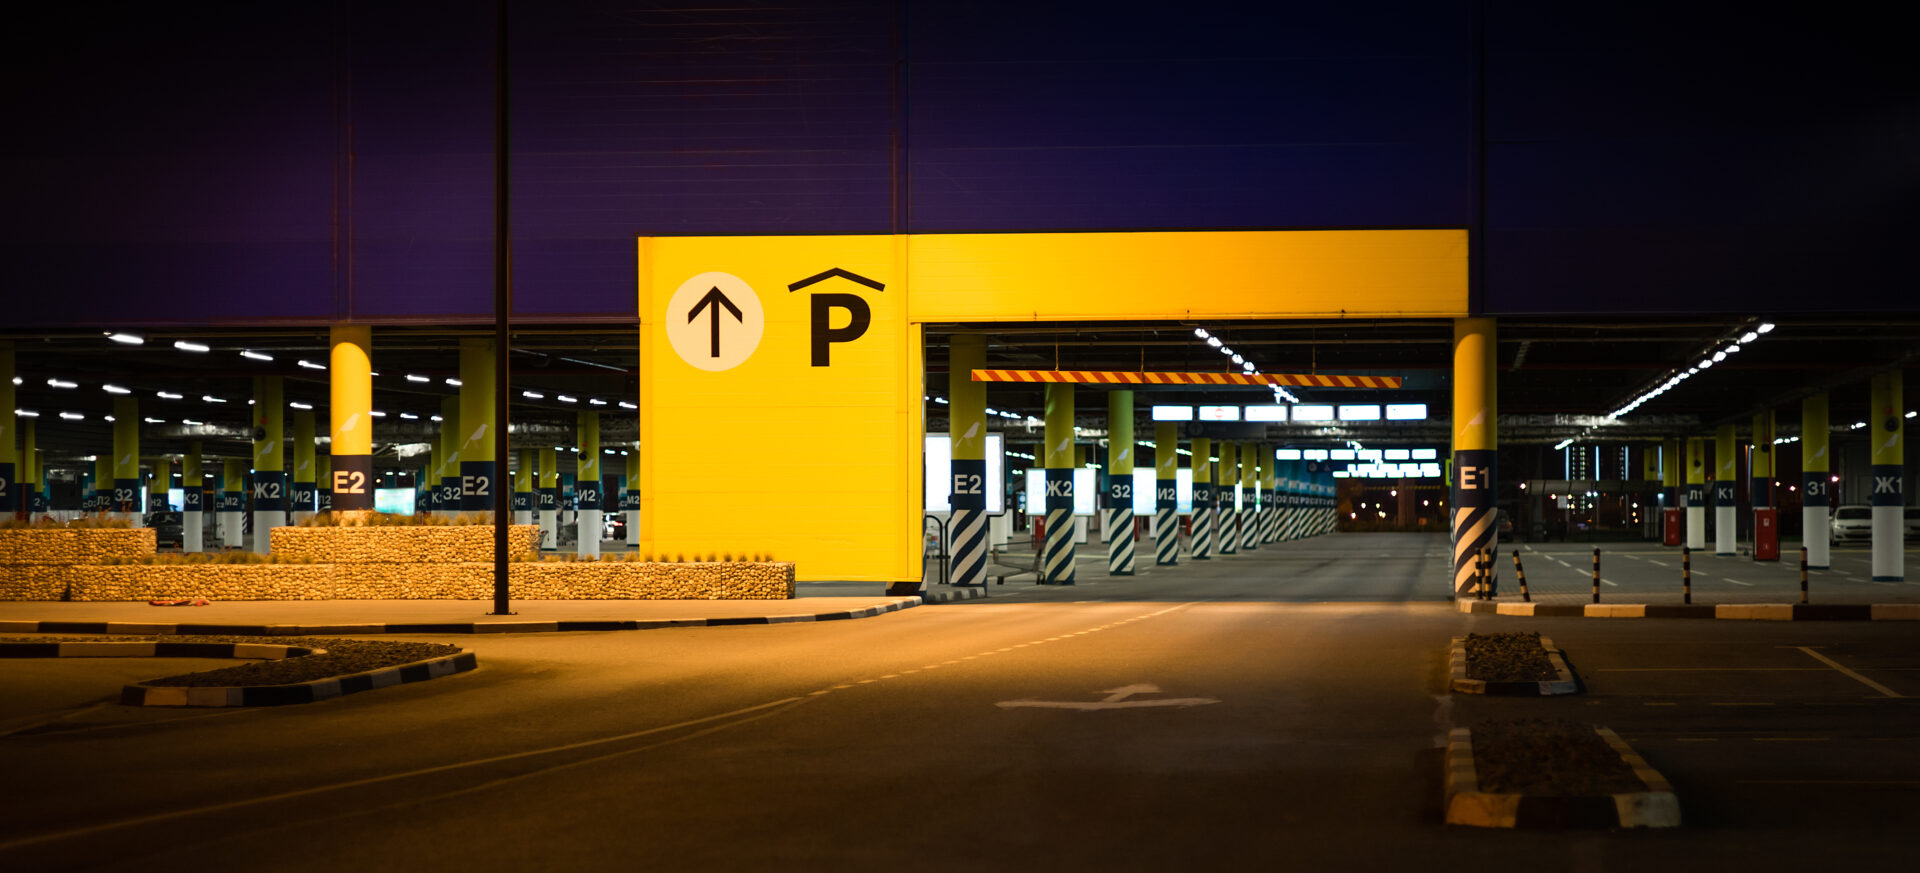 A parking lot with a yellow sign and an arrow pointing up.